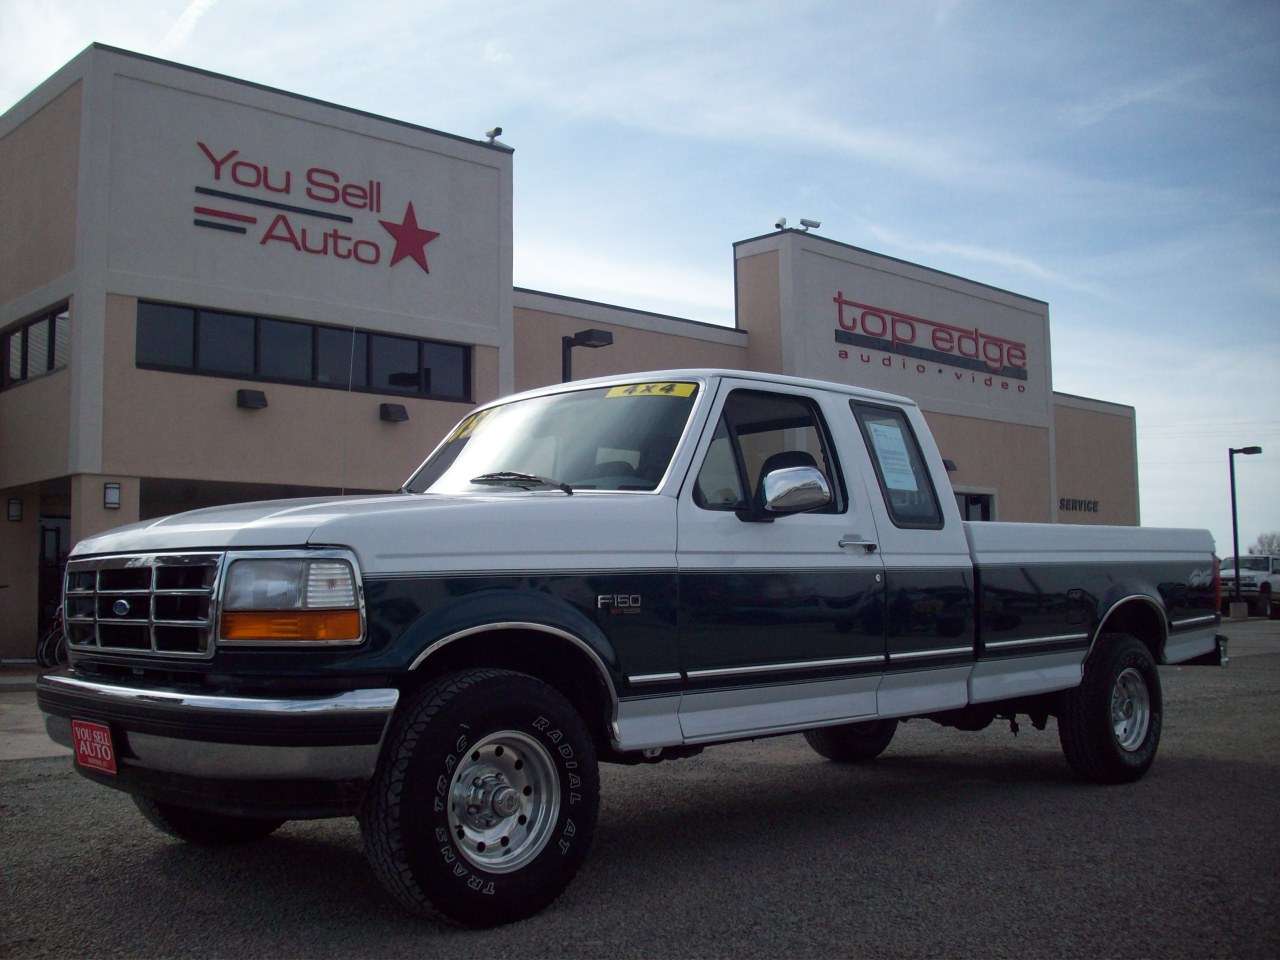 1995 FORD F150 XLT 4x4 Extended Cab Pickup SOLD! | You Sell Auto 1995 Ford F150 4.9 Towing Capacity